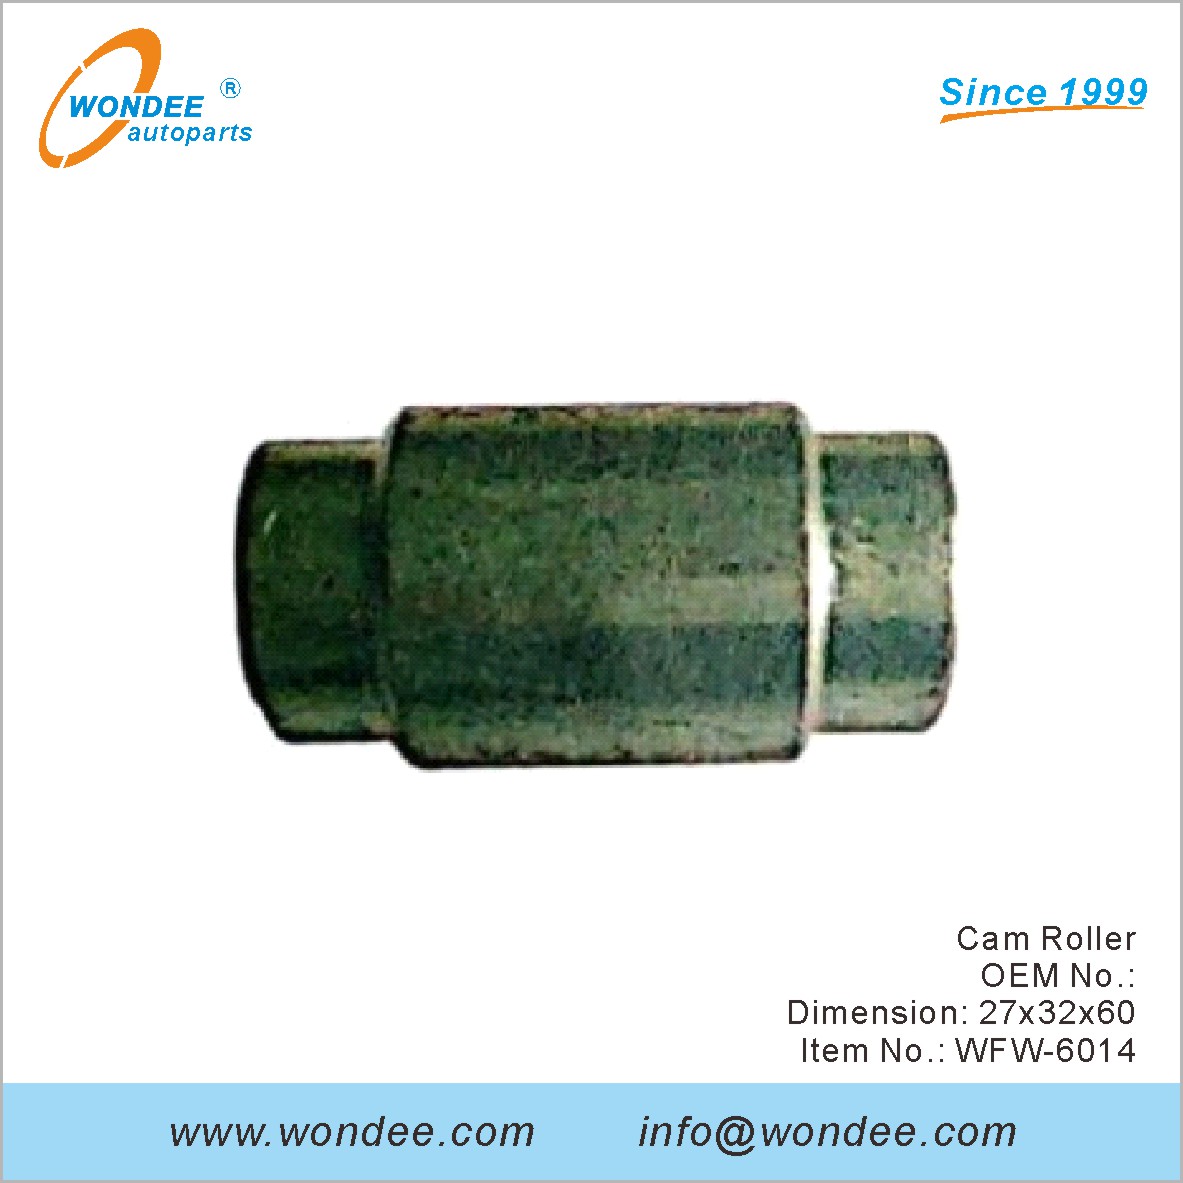 Cam Roller OEM for FUWA from WONDEE (2)